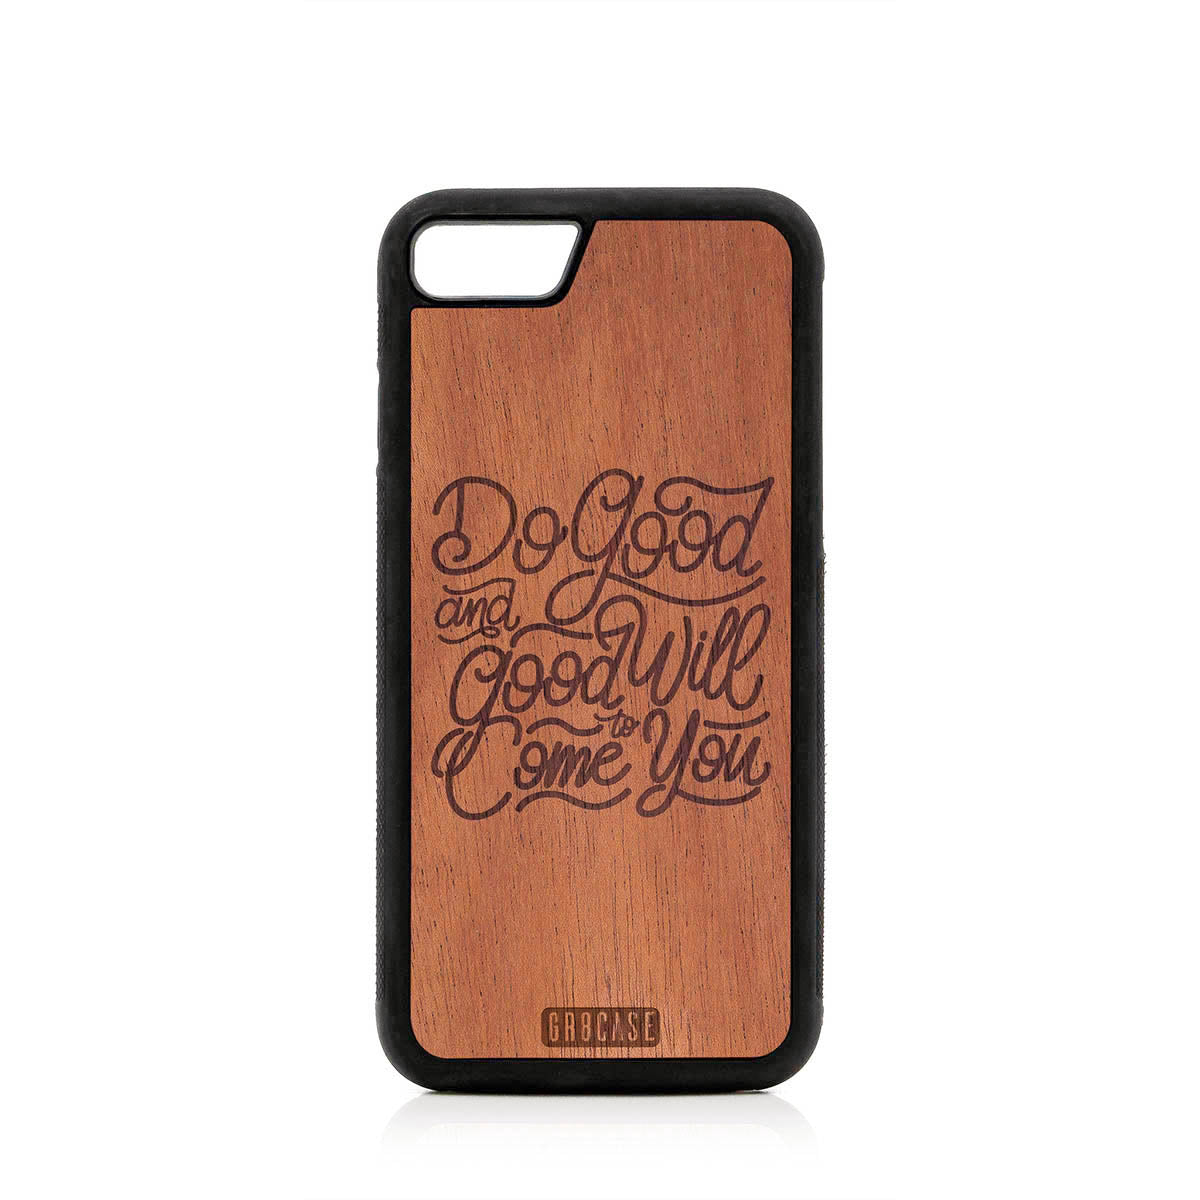 Do Good And Good Will Come To You Design Wood Case For iPhone 7/8 by GR8CASE